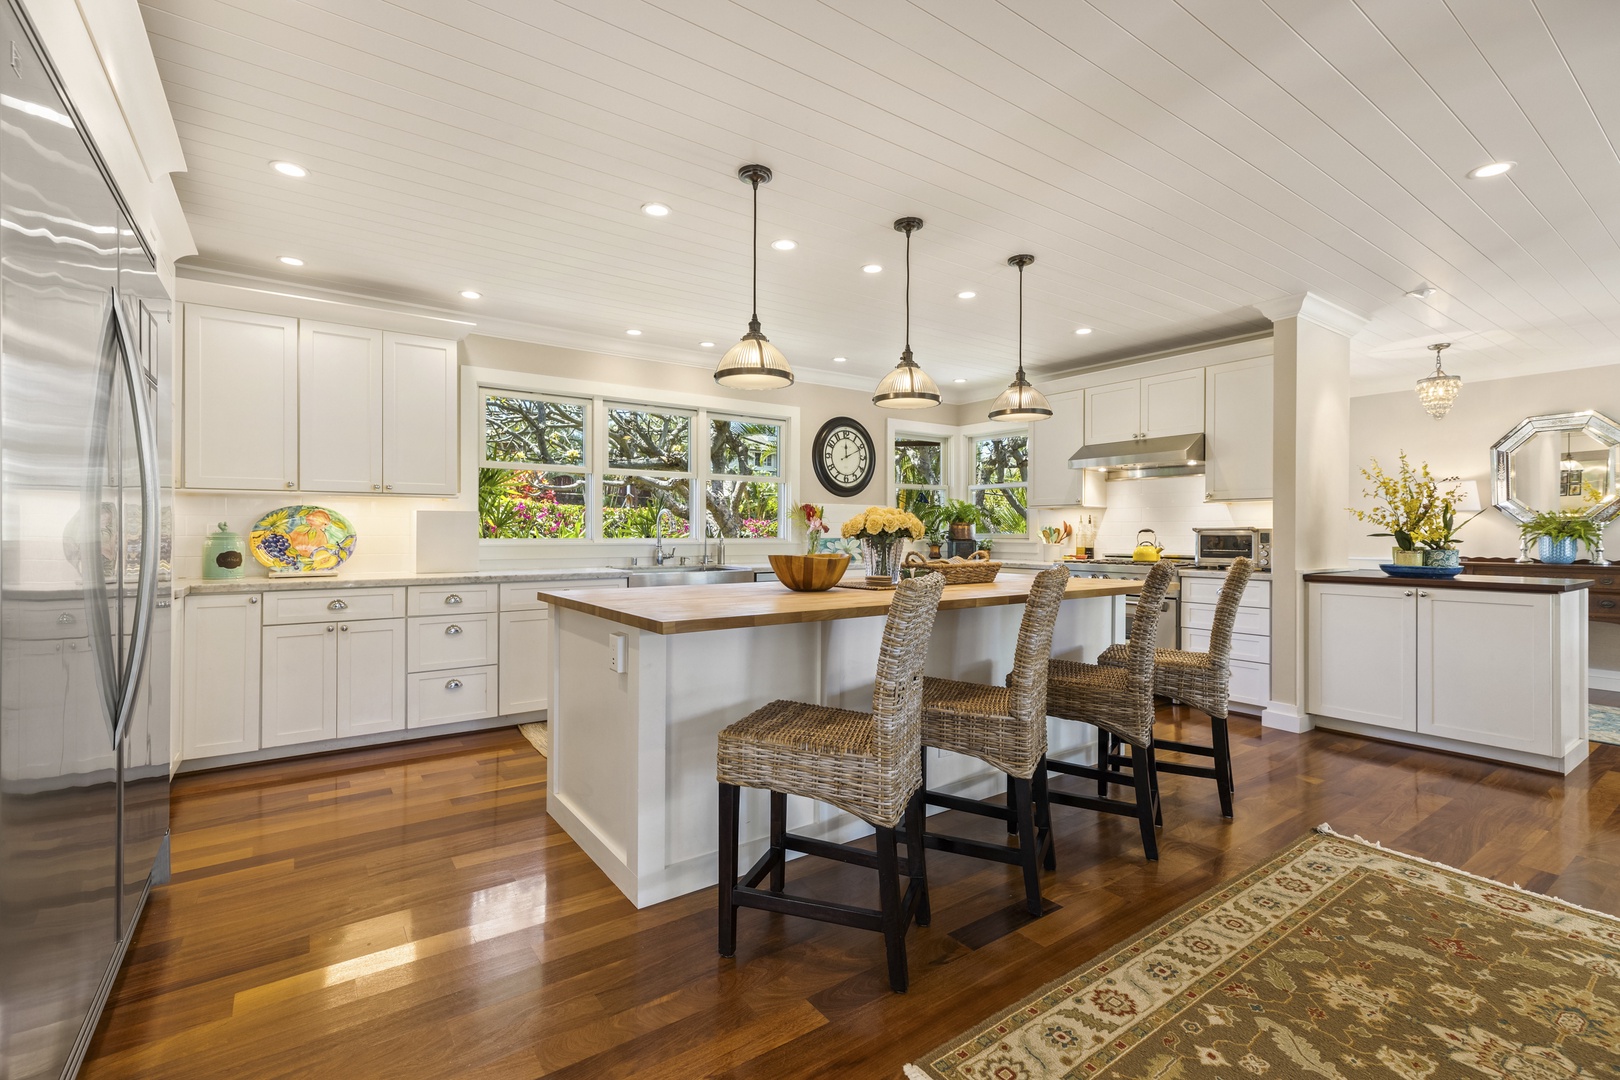 Honolulu Vacation Rentals, Hale Le'ahi - Large kitchen perfect for cooking gourmet meals and entertaining guests